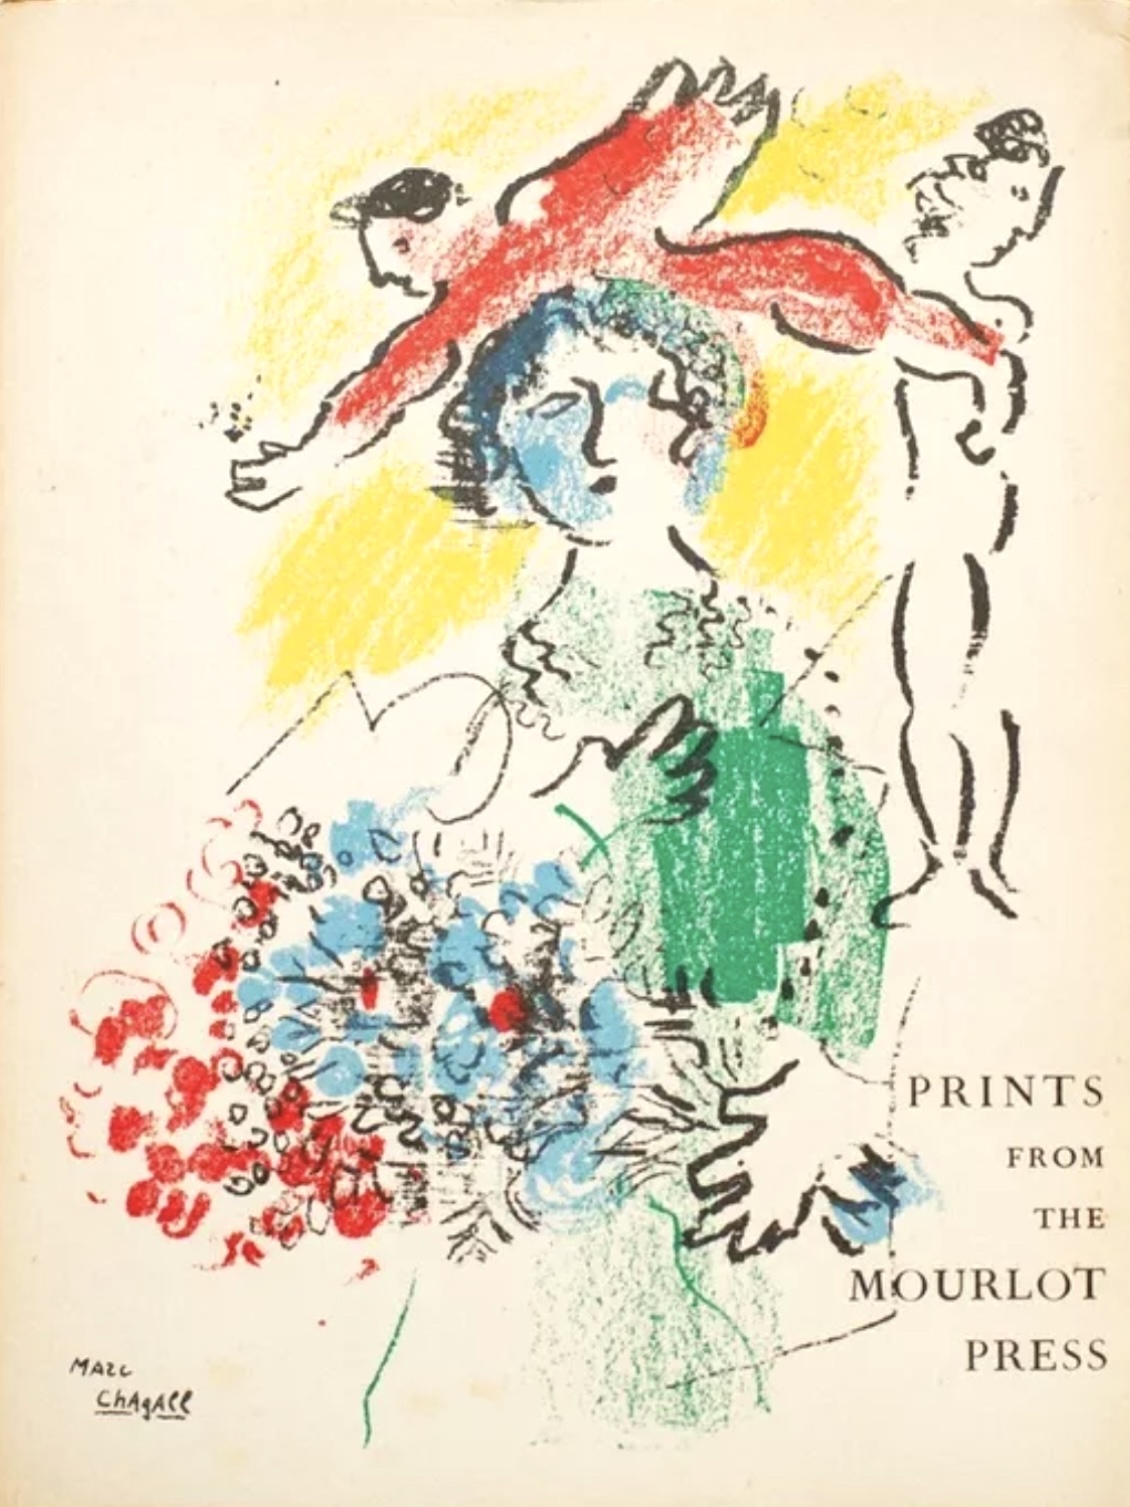 Chagall Original Lithograph Prints from the Mourlot Press 1964